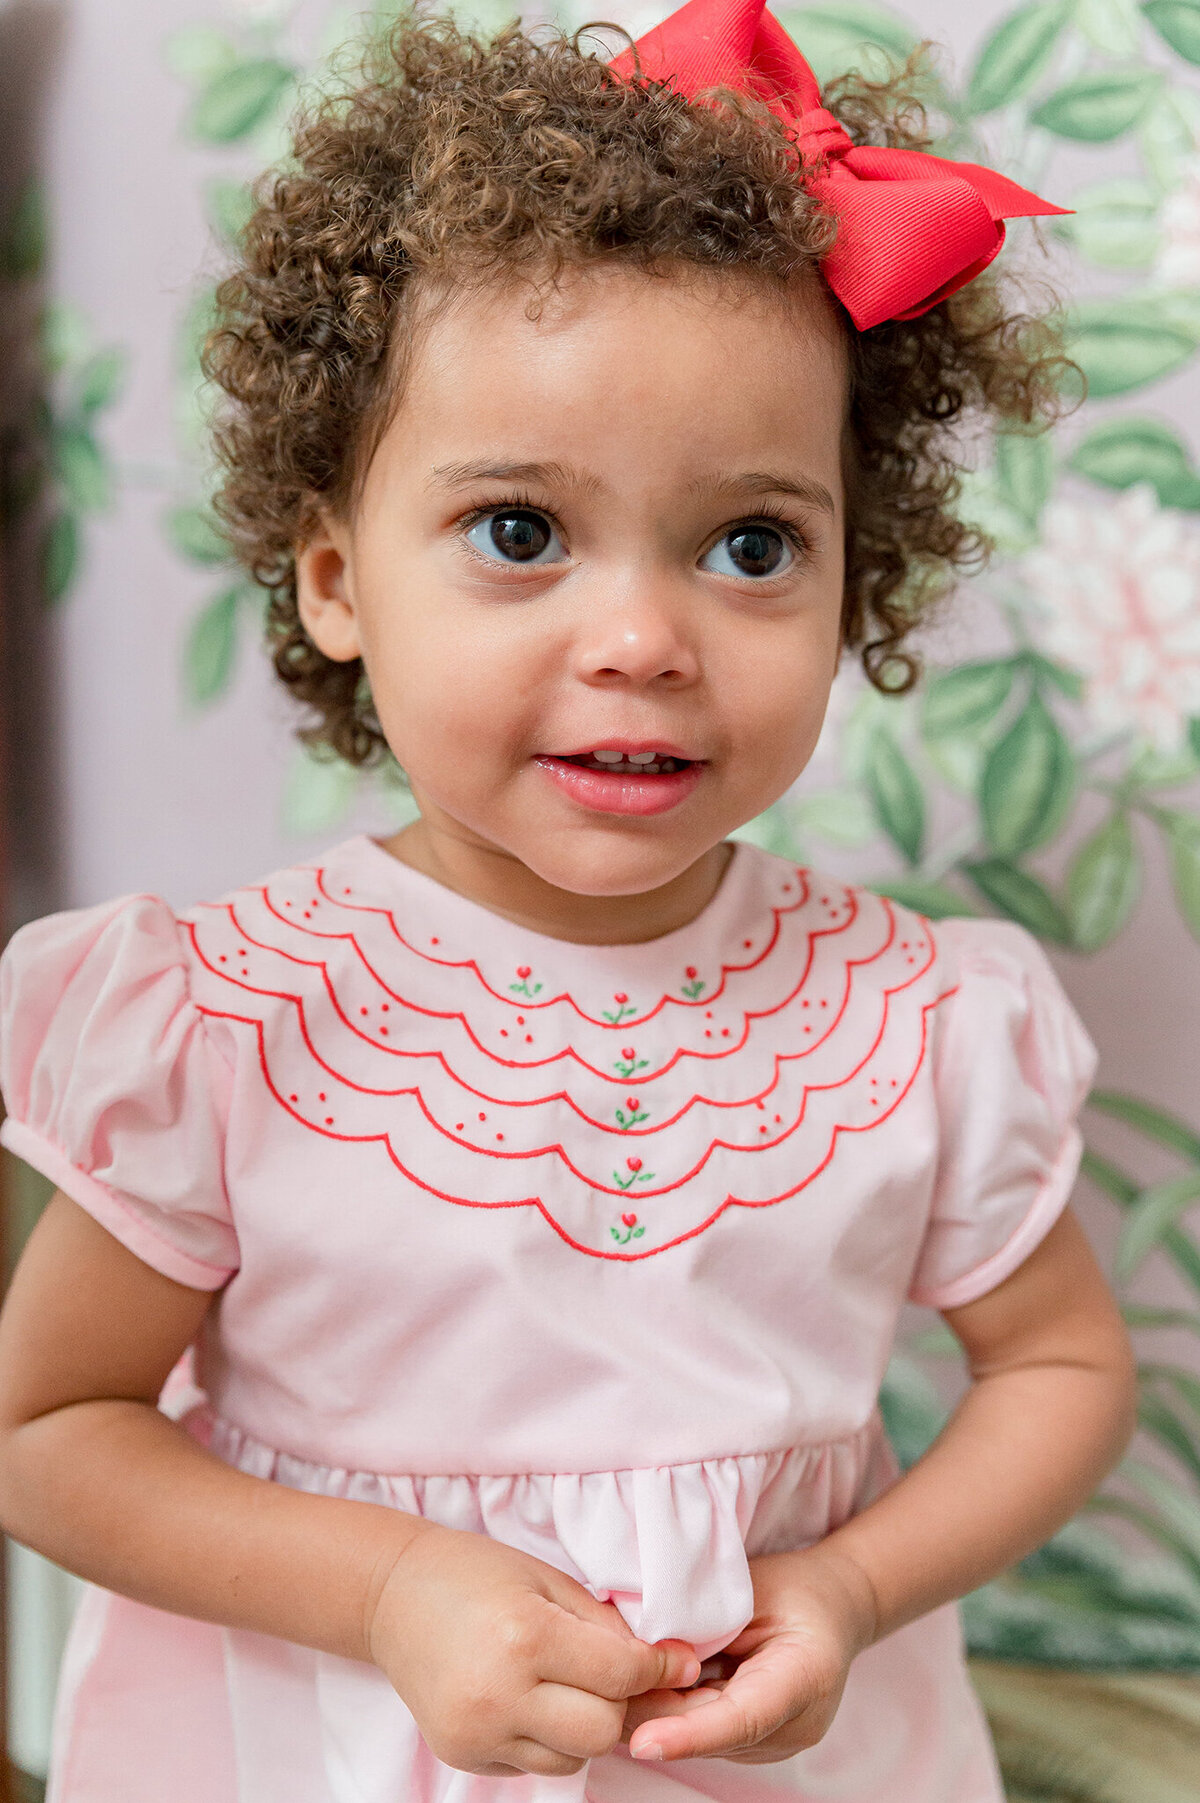 Curly headed girl wearing a pink romper with scalloped red embroidery around the neck.